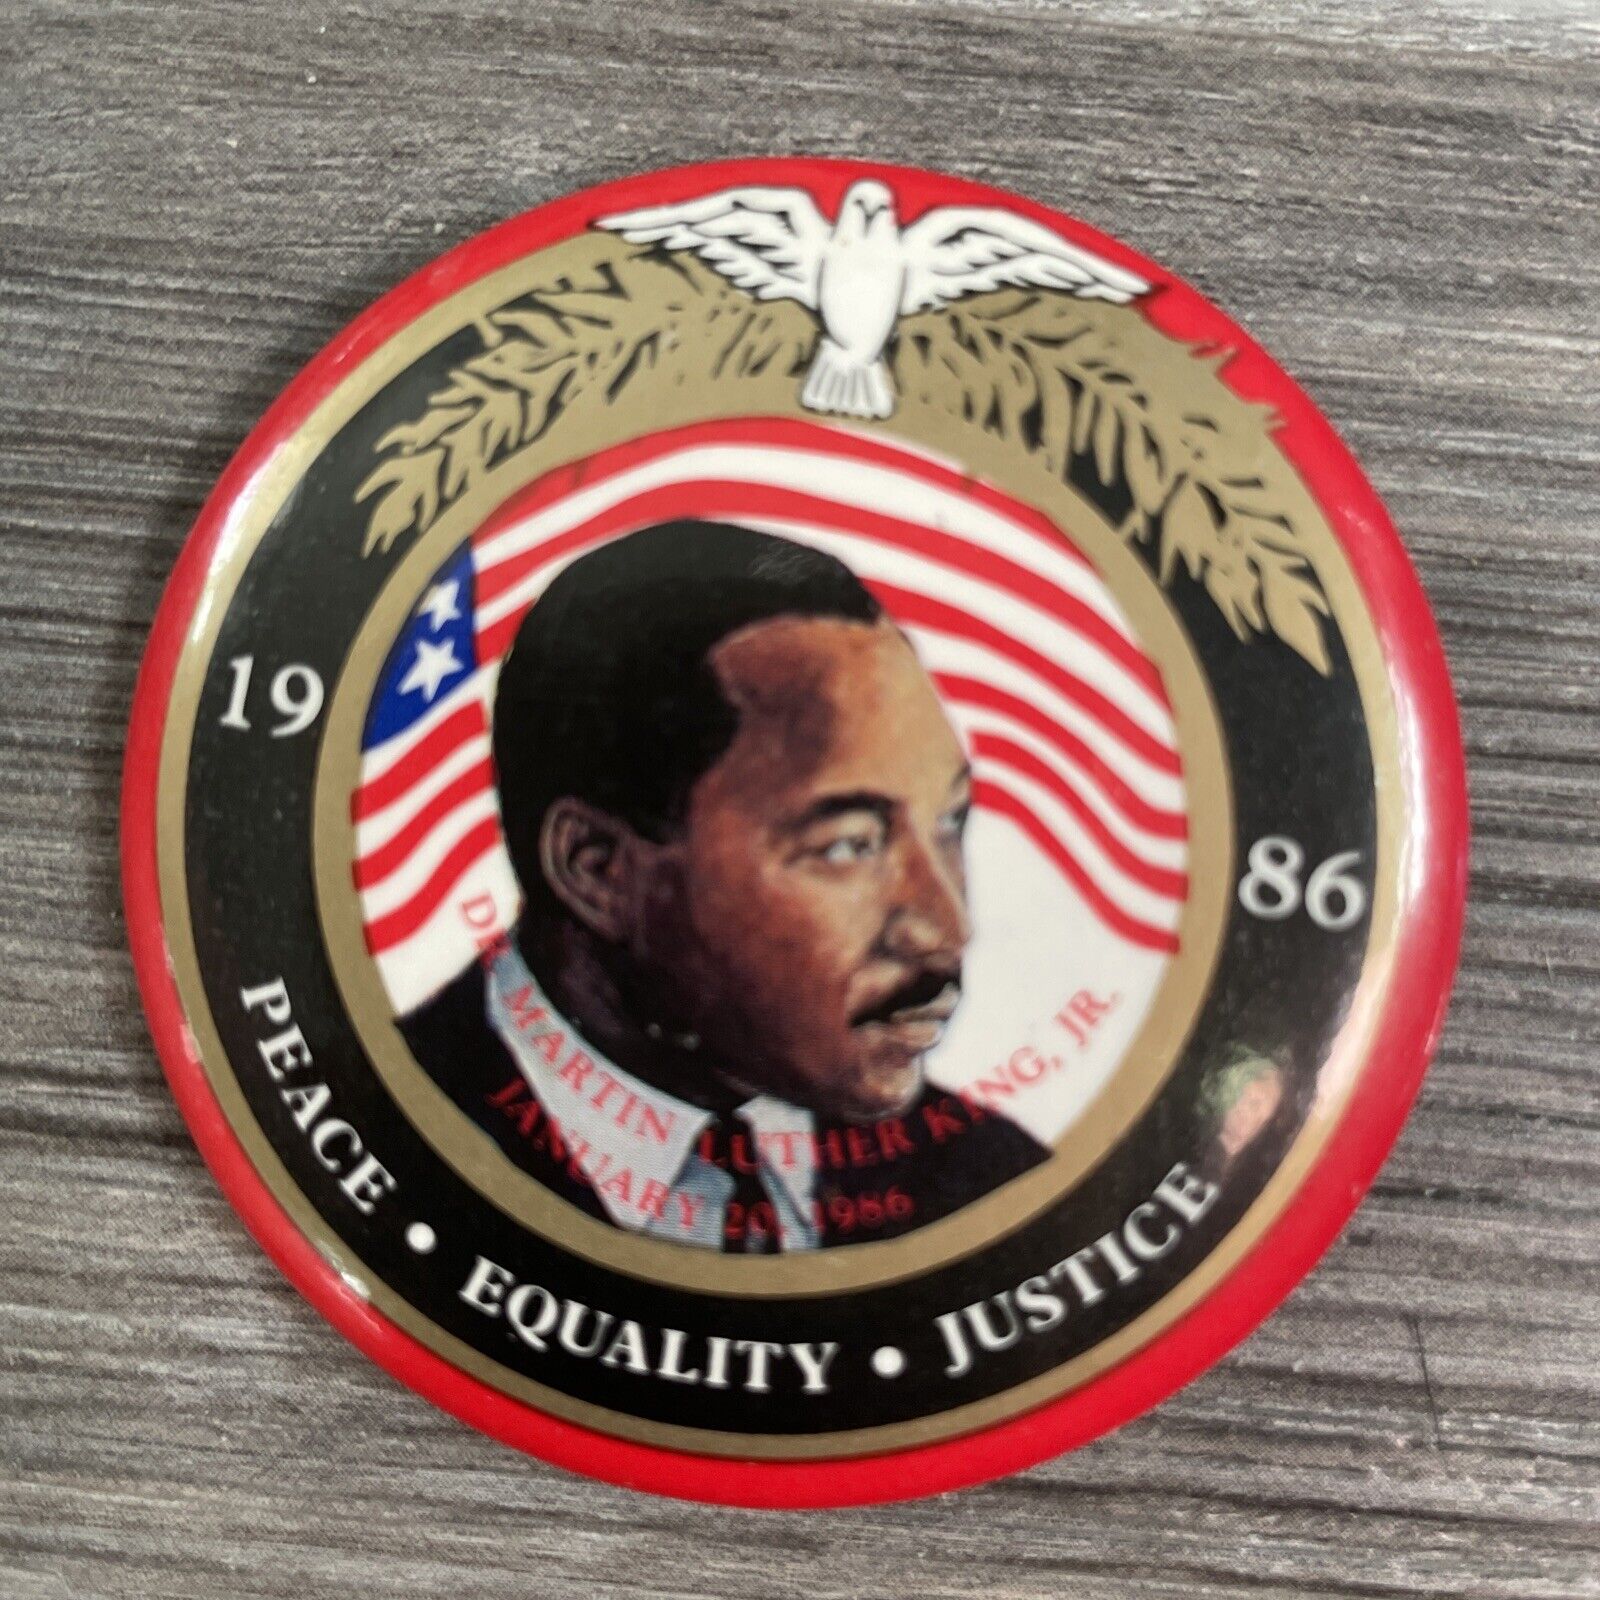 Dr. Martin Luther King Jr. 1986 Peace Equality Justice Pin…